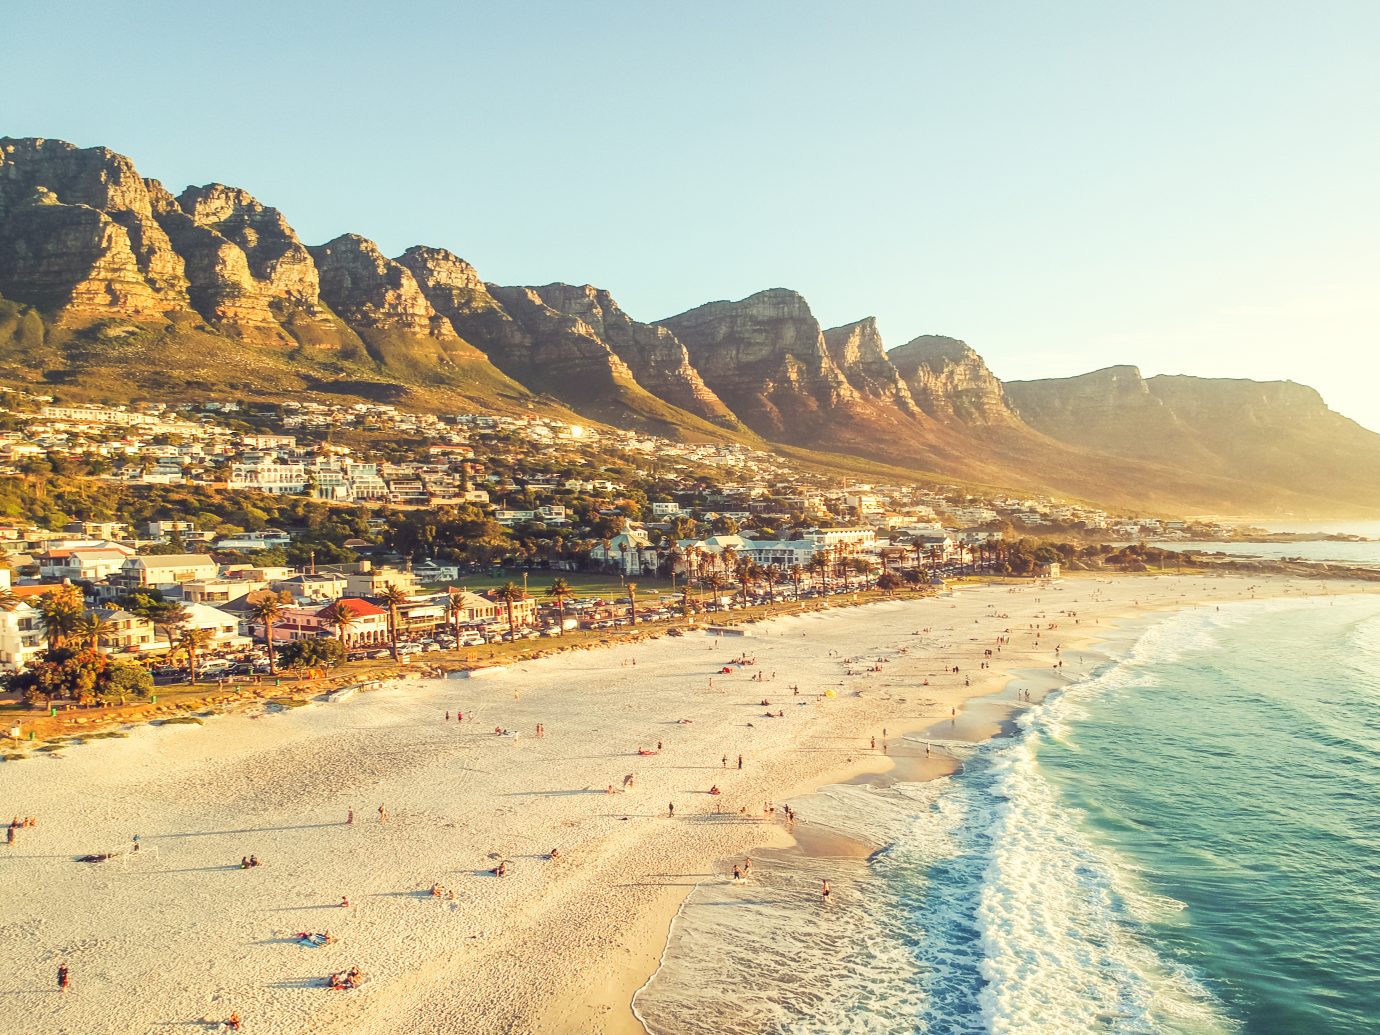 Camps Bay, of Cape Town, Western Cape, South Africa.